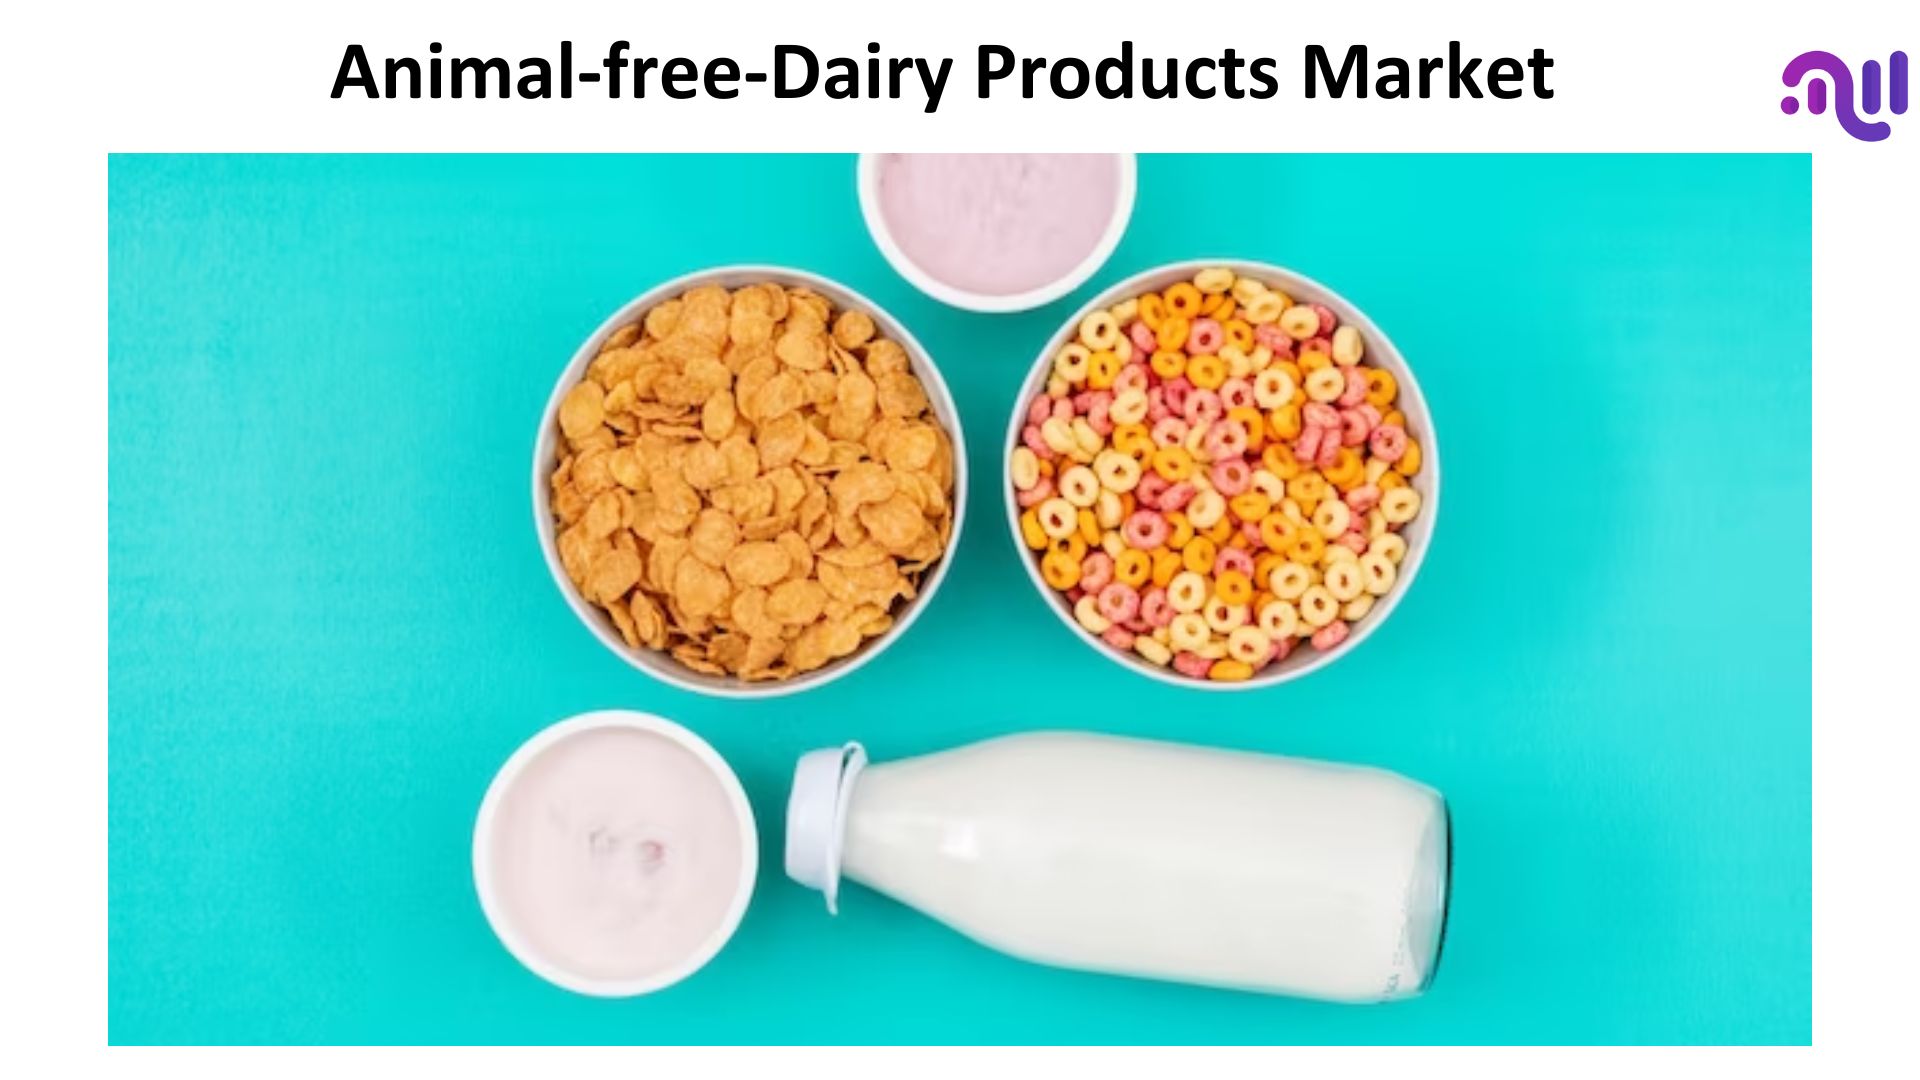 Animal-free-Dairy Products Market Top Trends and industry overview to watch for in 2033 | CAGR of 12%